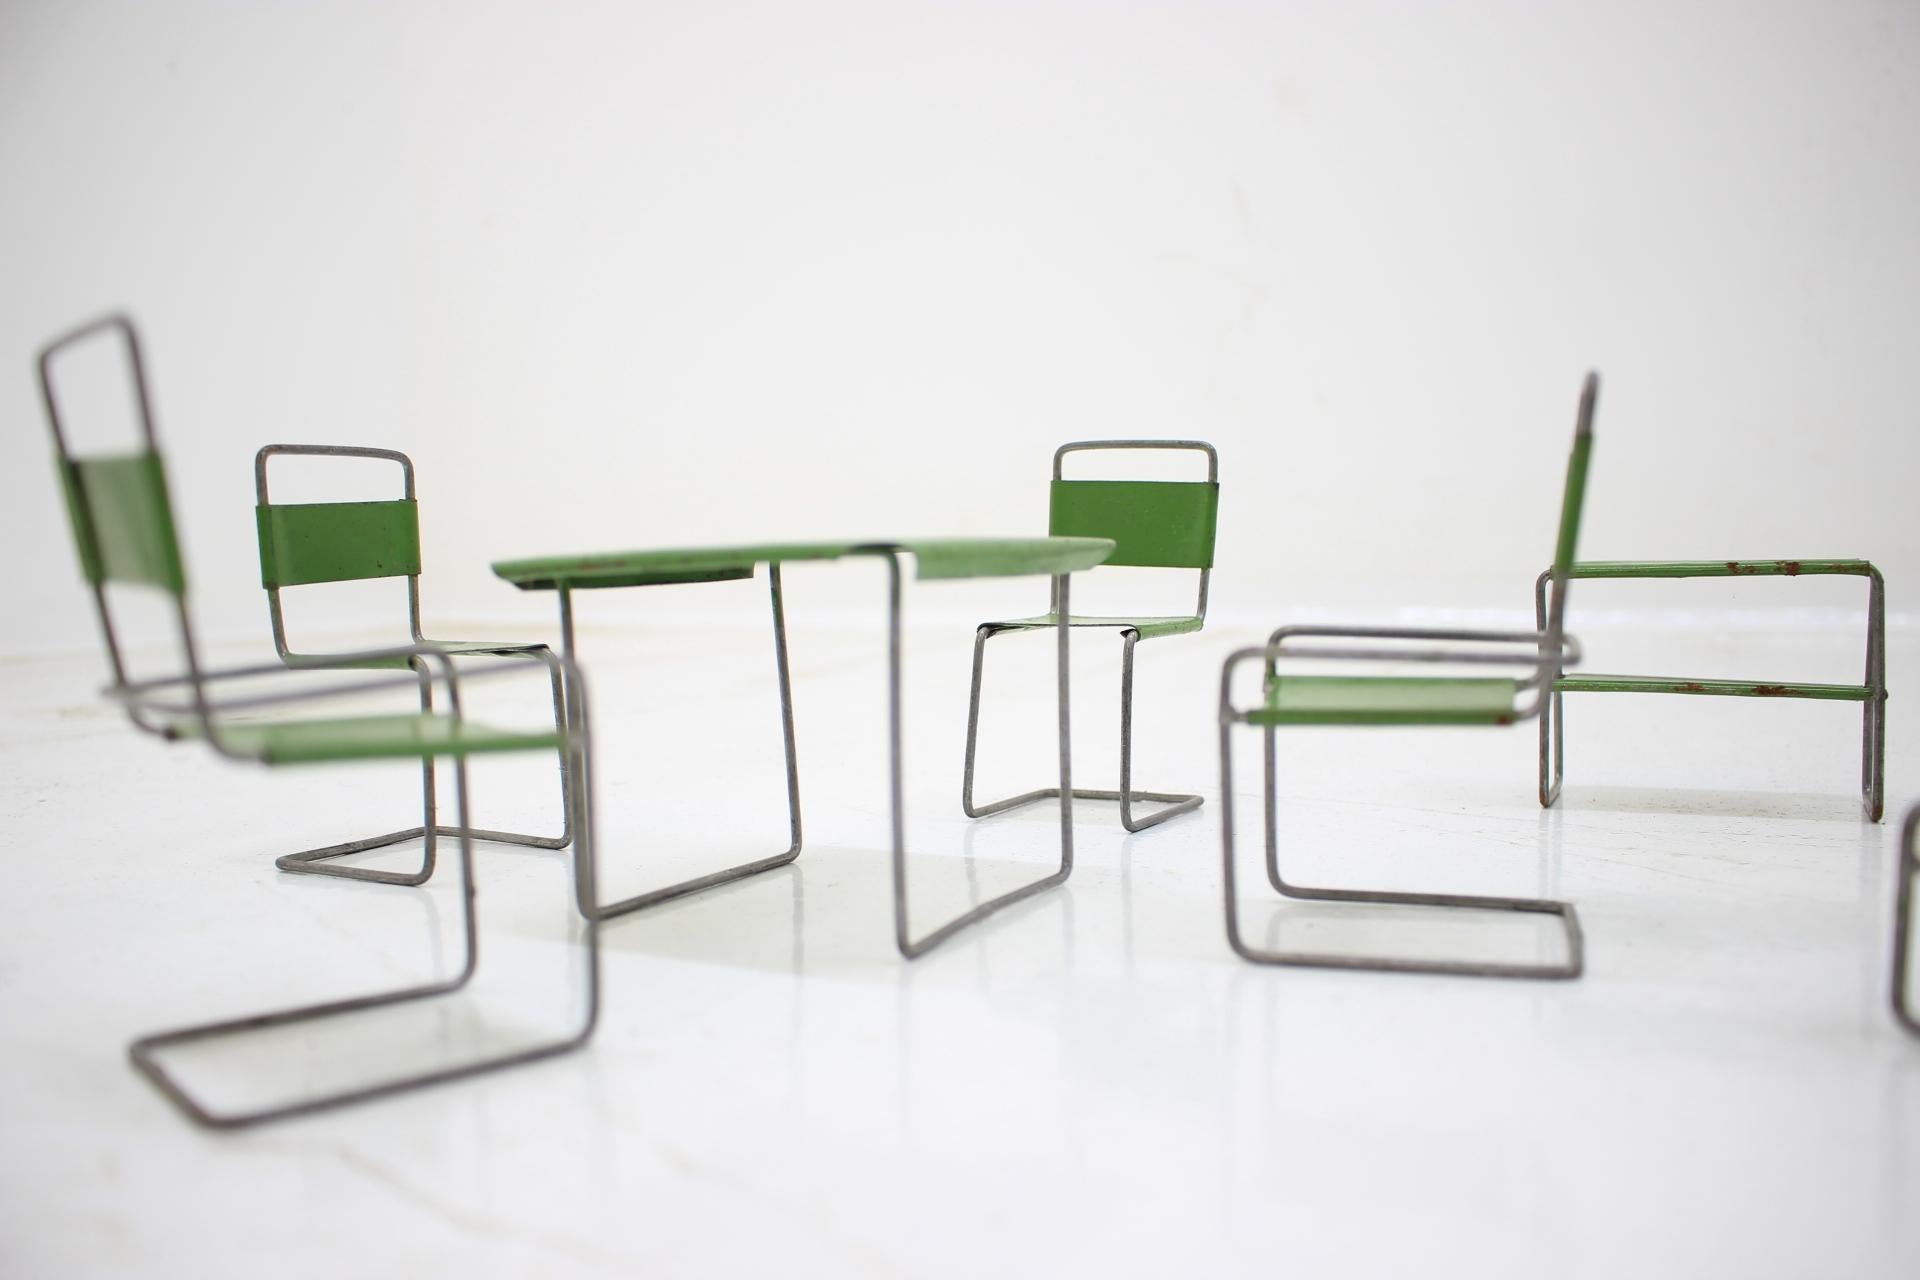 - 1930s
- Completely original condition
- Original green color
- Inspired by Marcel Breuer and Mies van der Rohe.